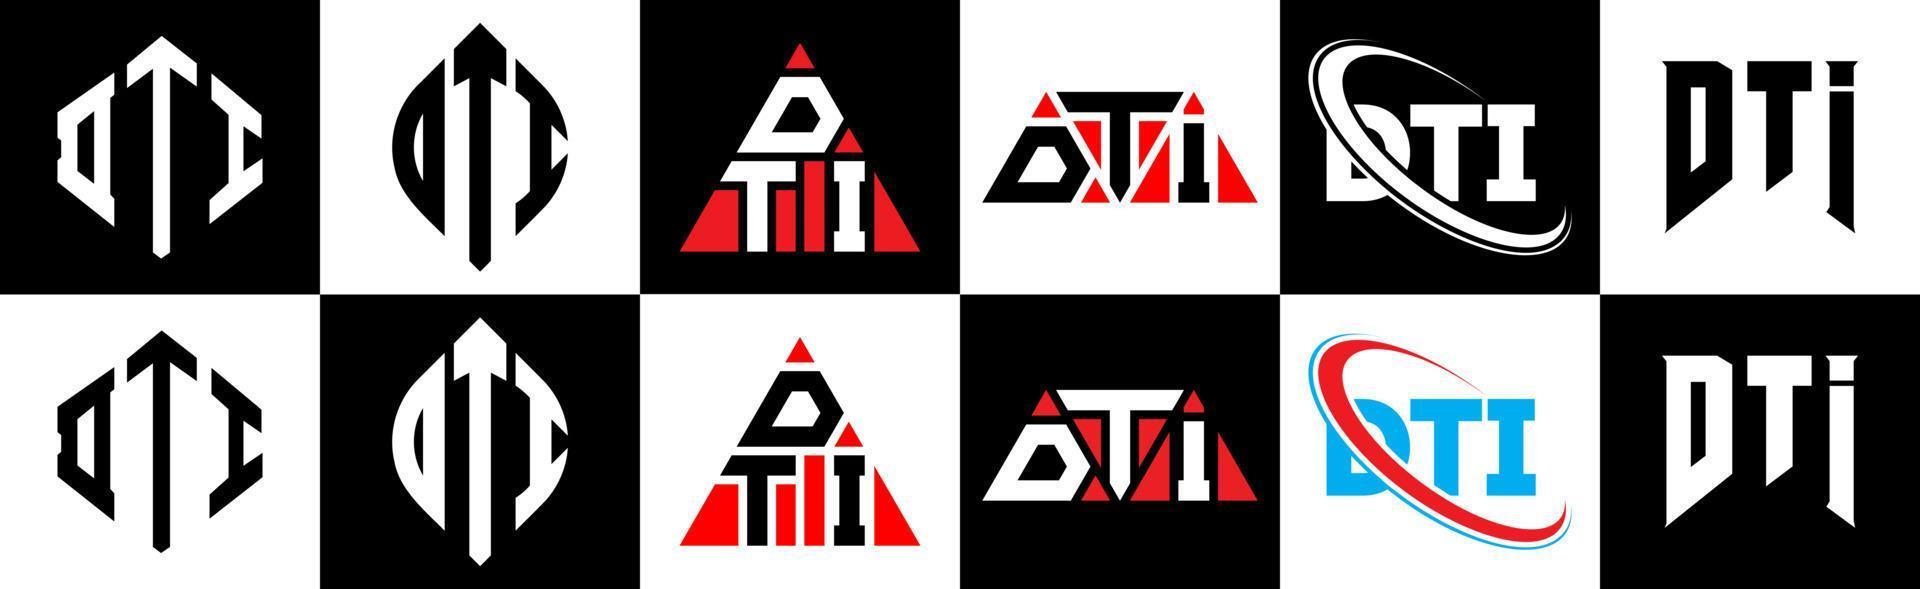 DTI letter logo design in six style. DTI polygon, circle, triangle, hexagon, flat and simple style with black and white color variation letter logo set in one artboard. DTI minimalist and classic logo vector